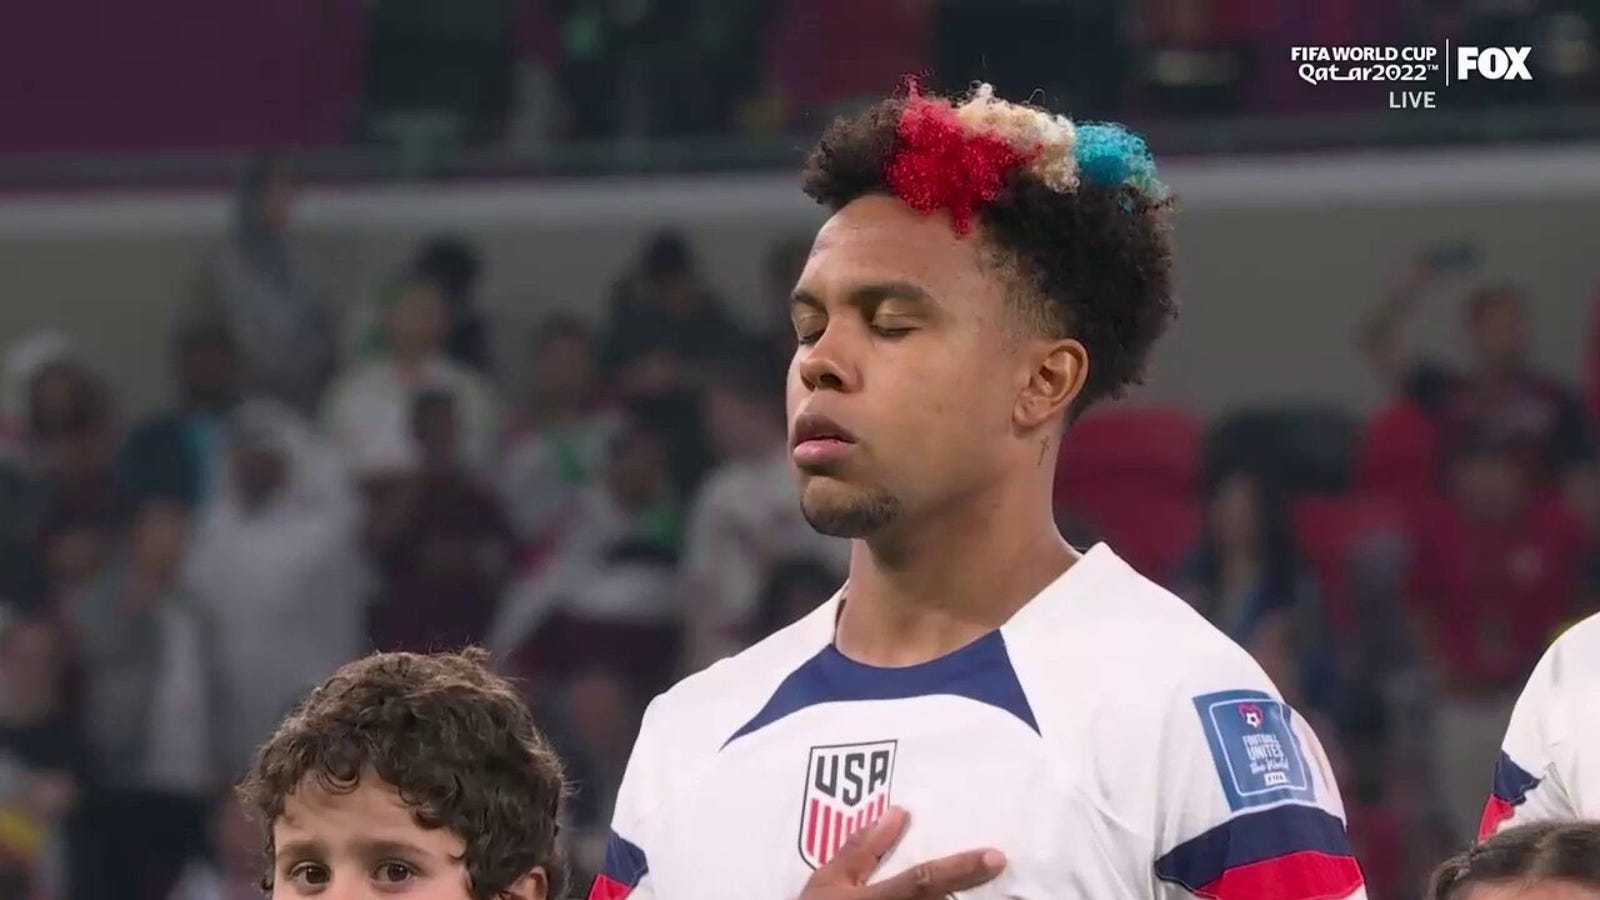 United States' National Anthem at the 2022 FIFA World Cup